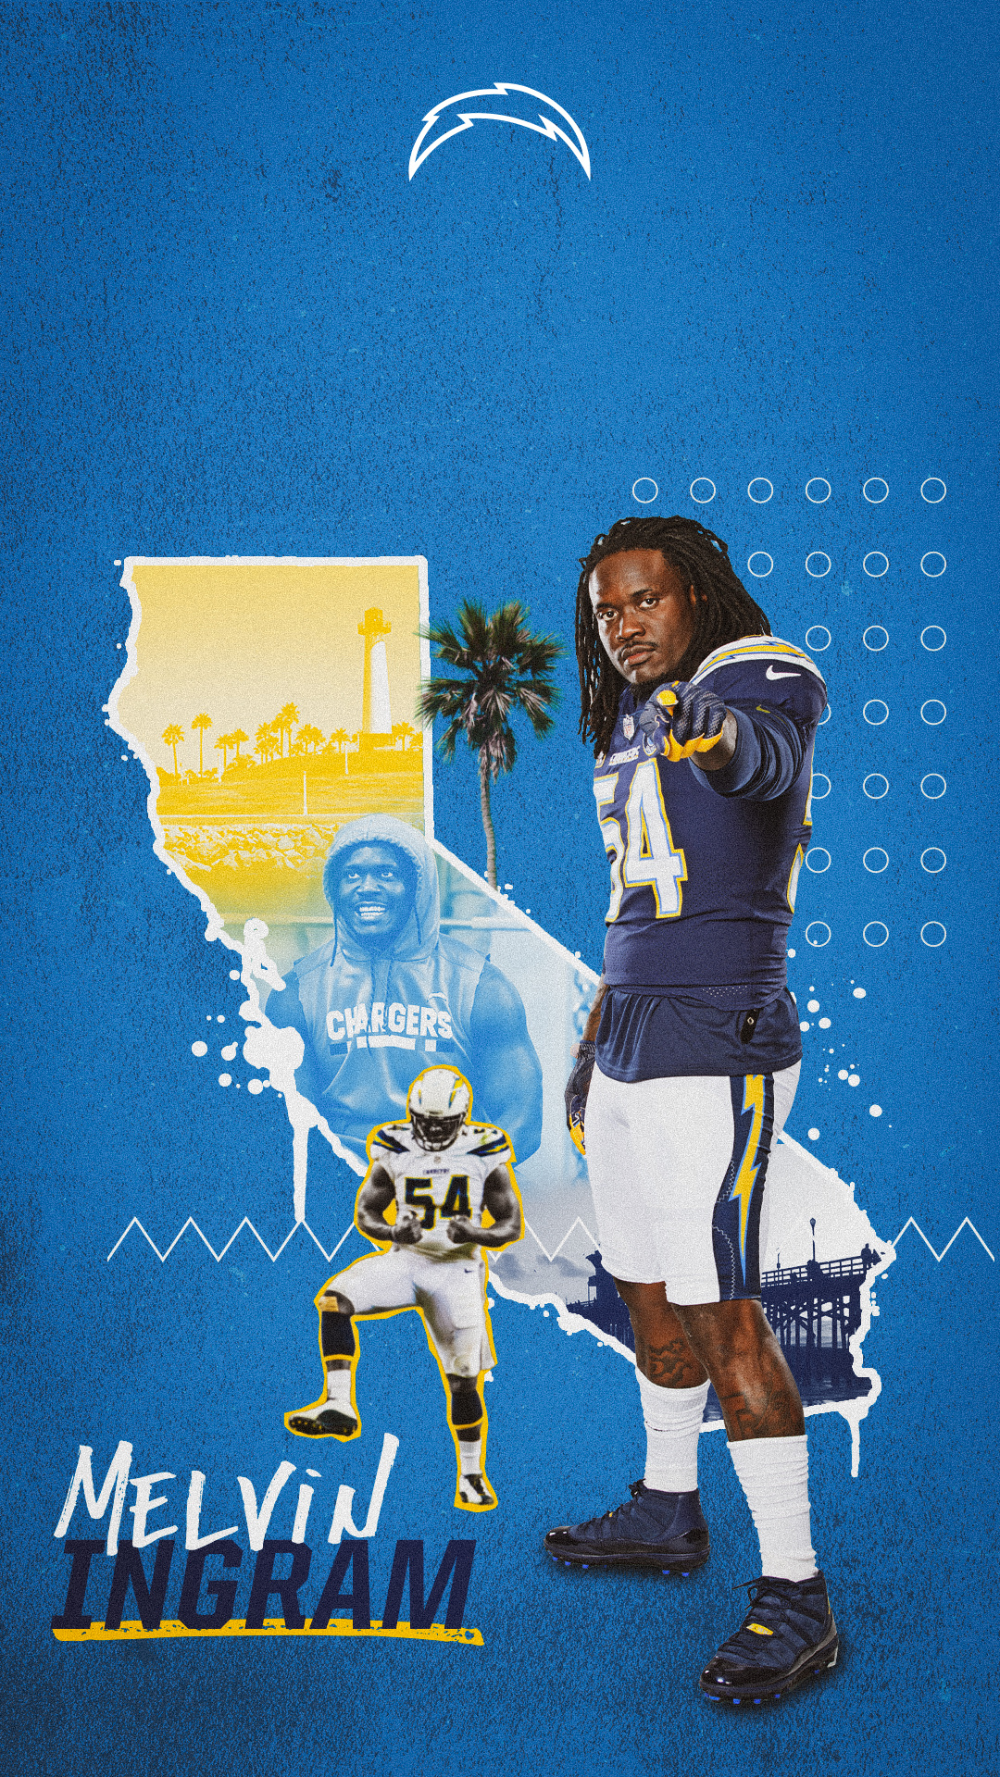 Background Chargers Wallpaper Discover more American Chargers Football  Los Angeles Metropol  Los angeles chargers Los angeles chargers logo  La chargers logo